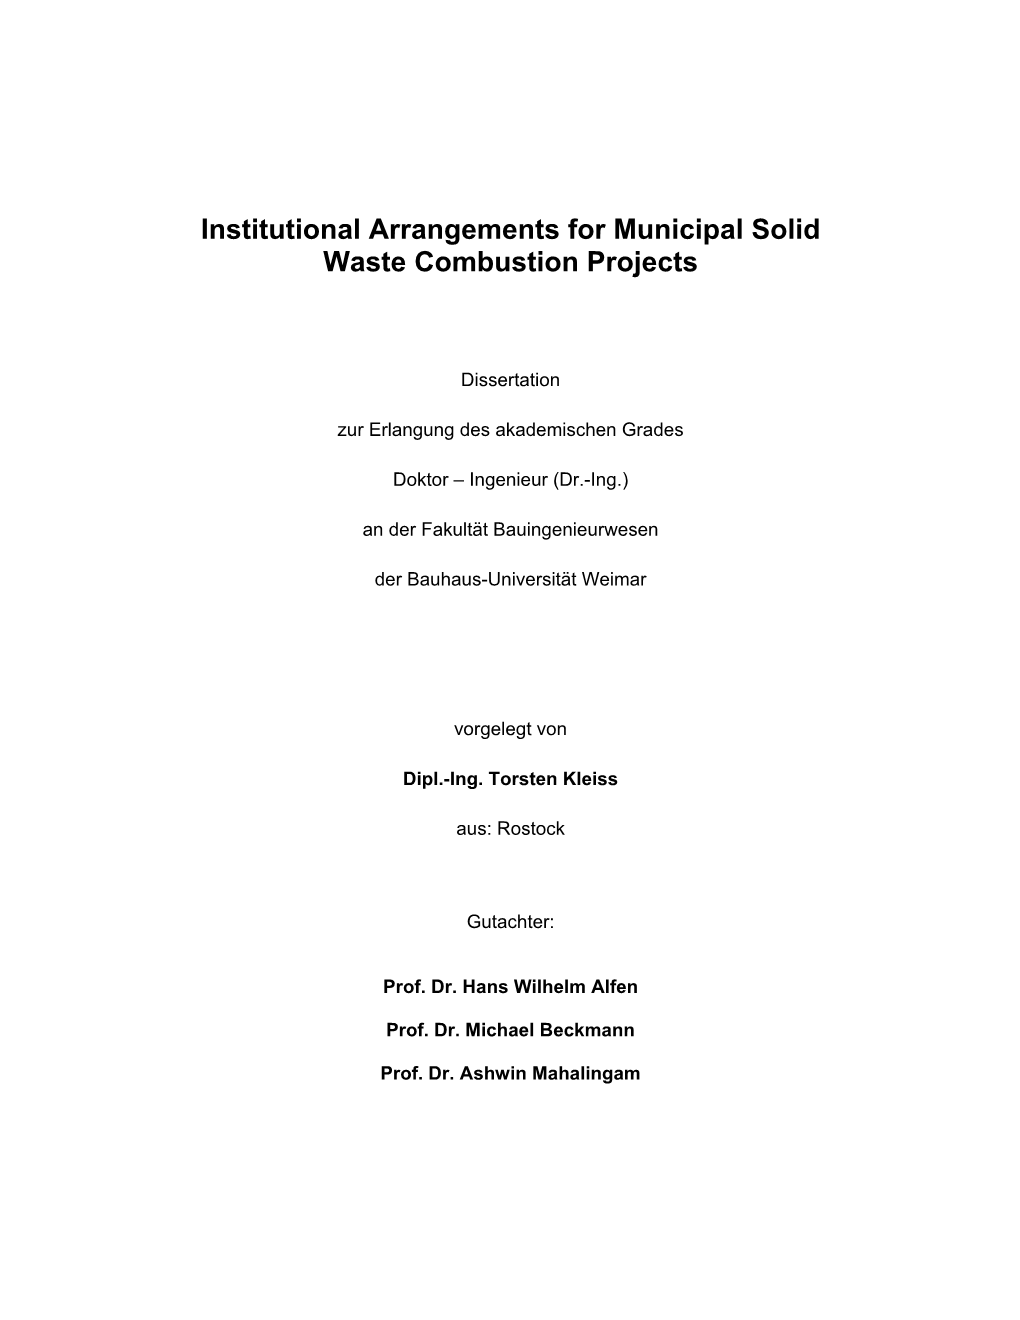 Institutional Arrangements for Municipal Solid Waste Combustion Projects